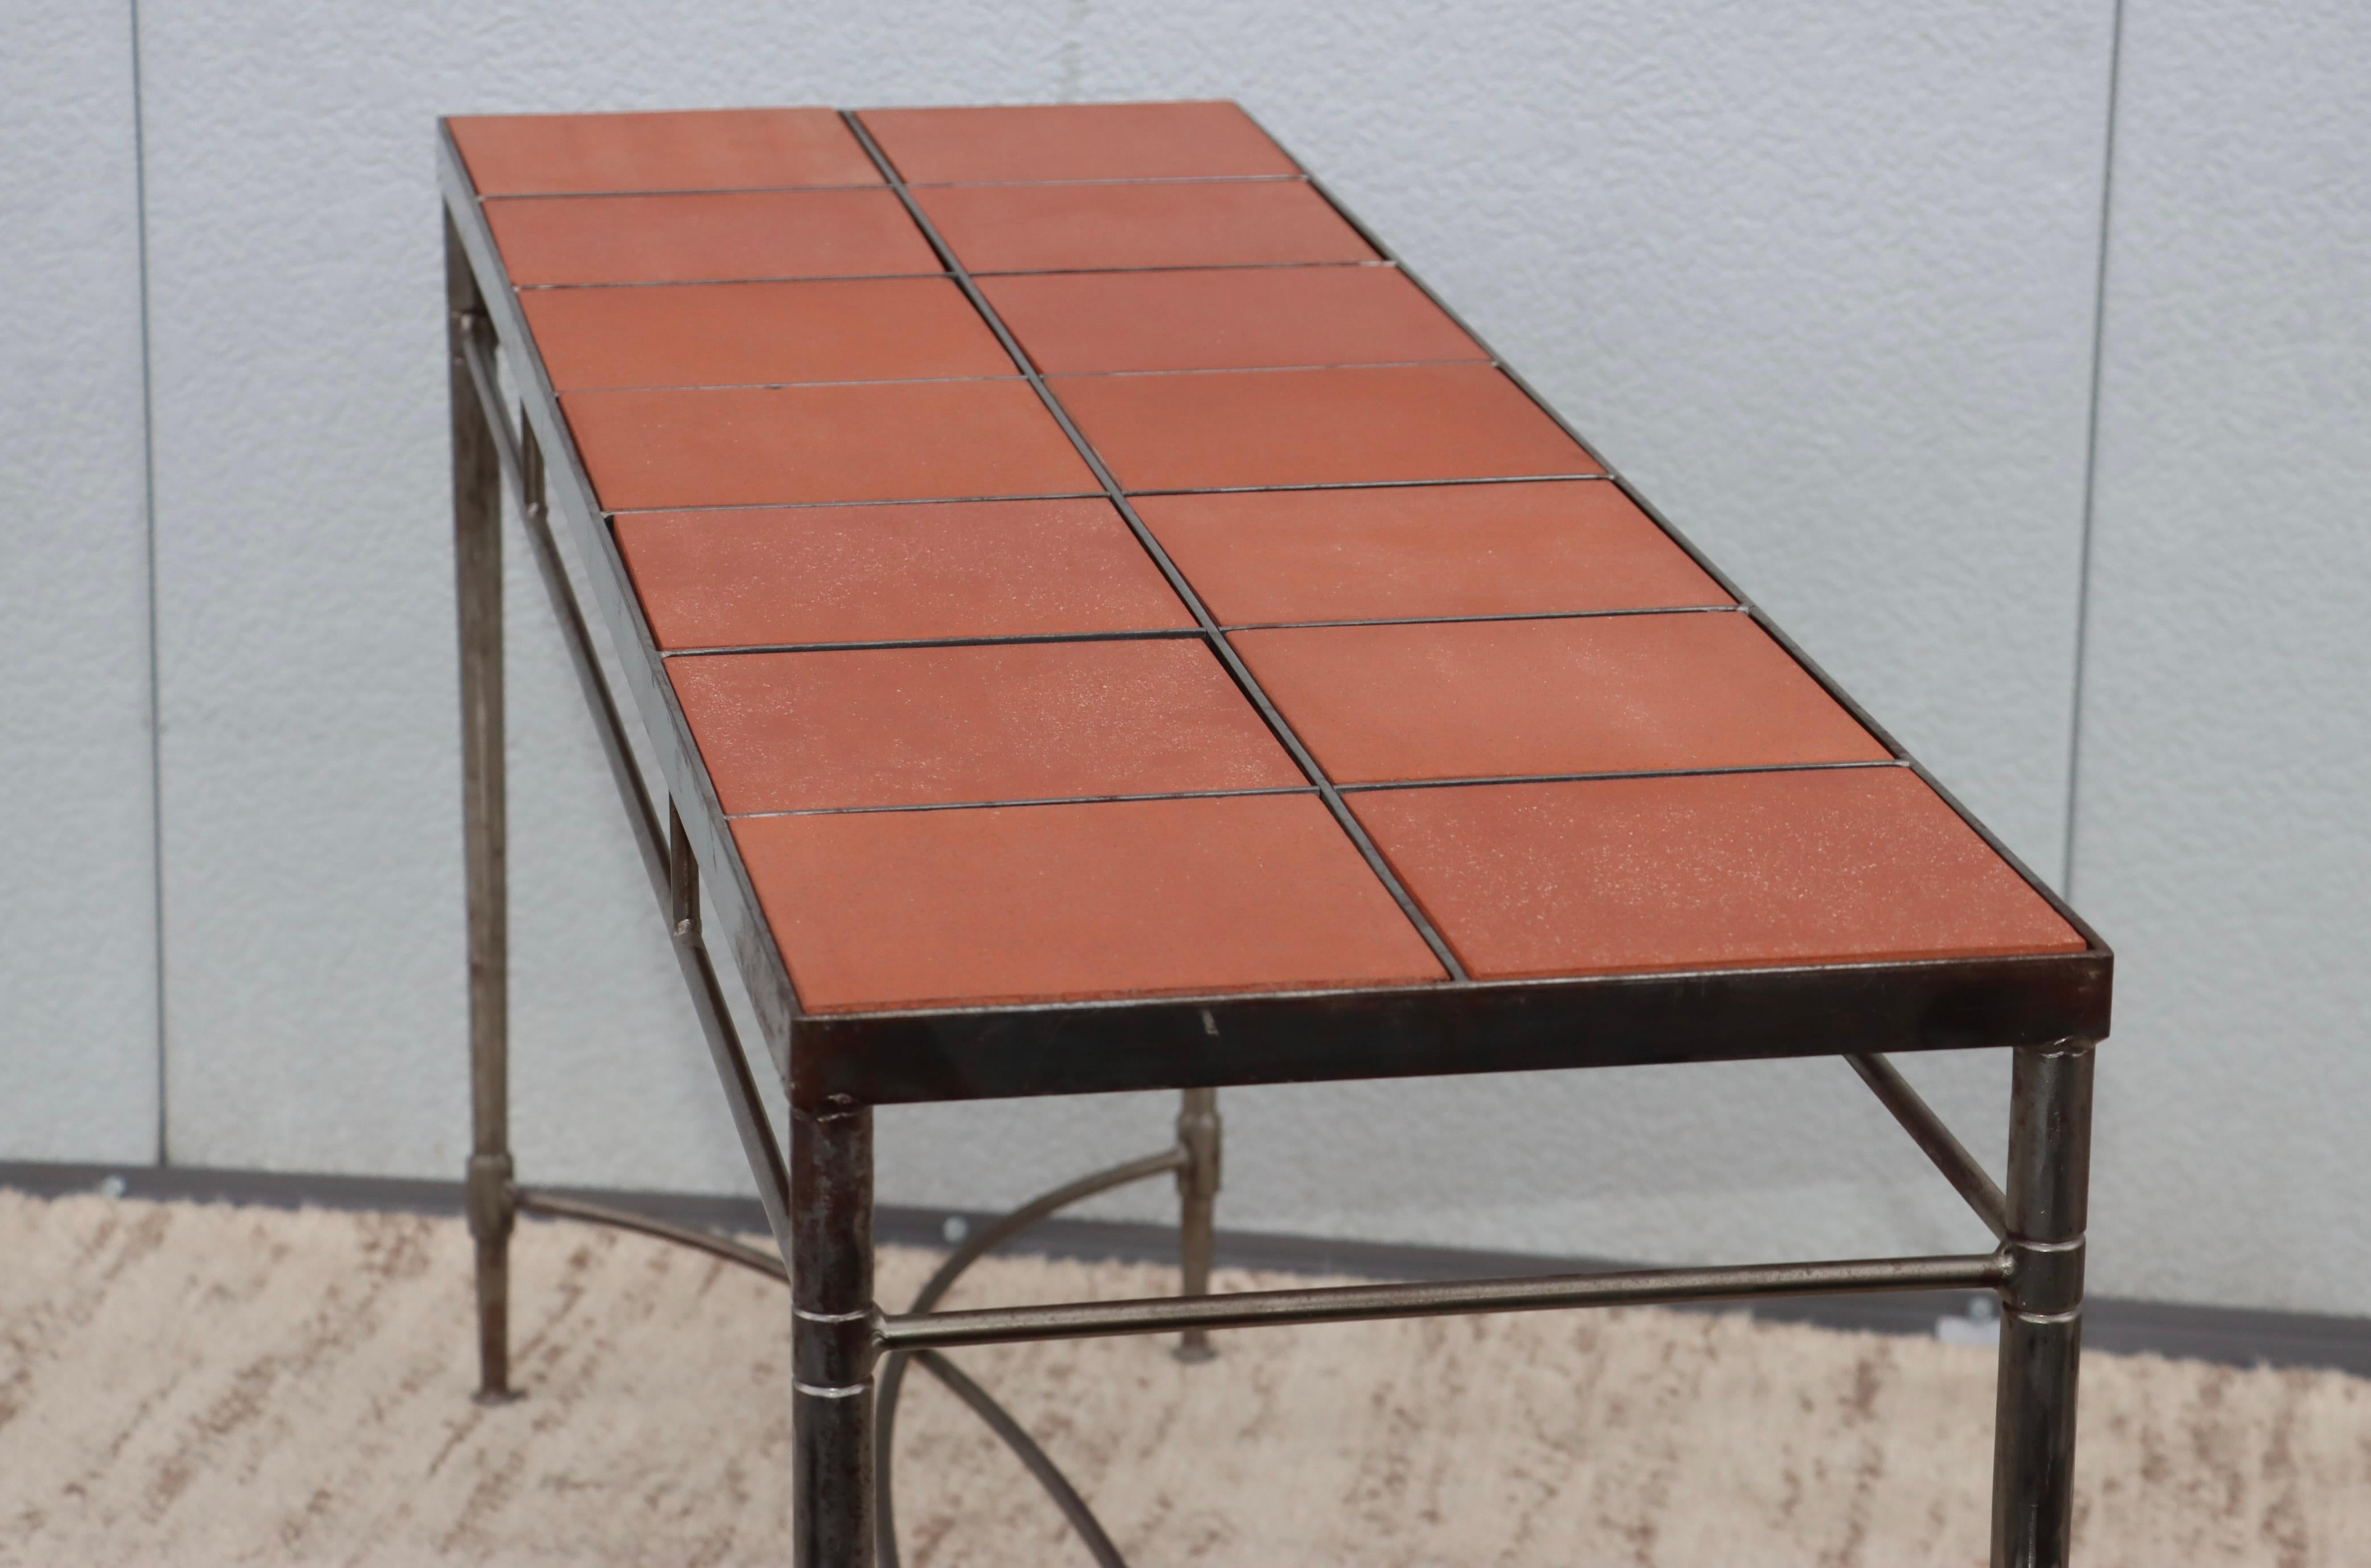 1970's Italian Iron Console Table with Impruneta Terracotta Tile Inserts For Sale 11